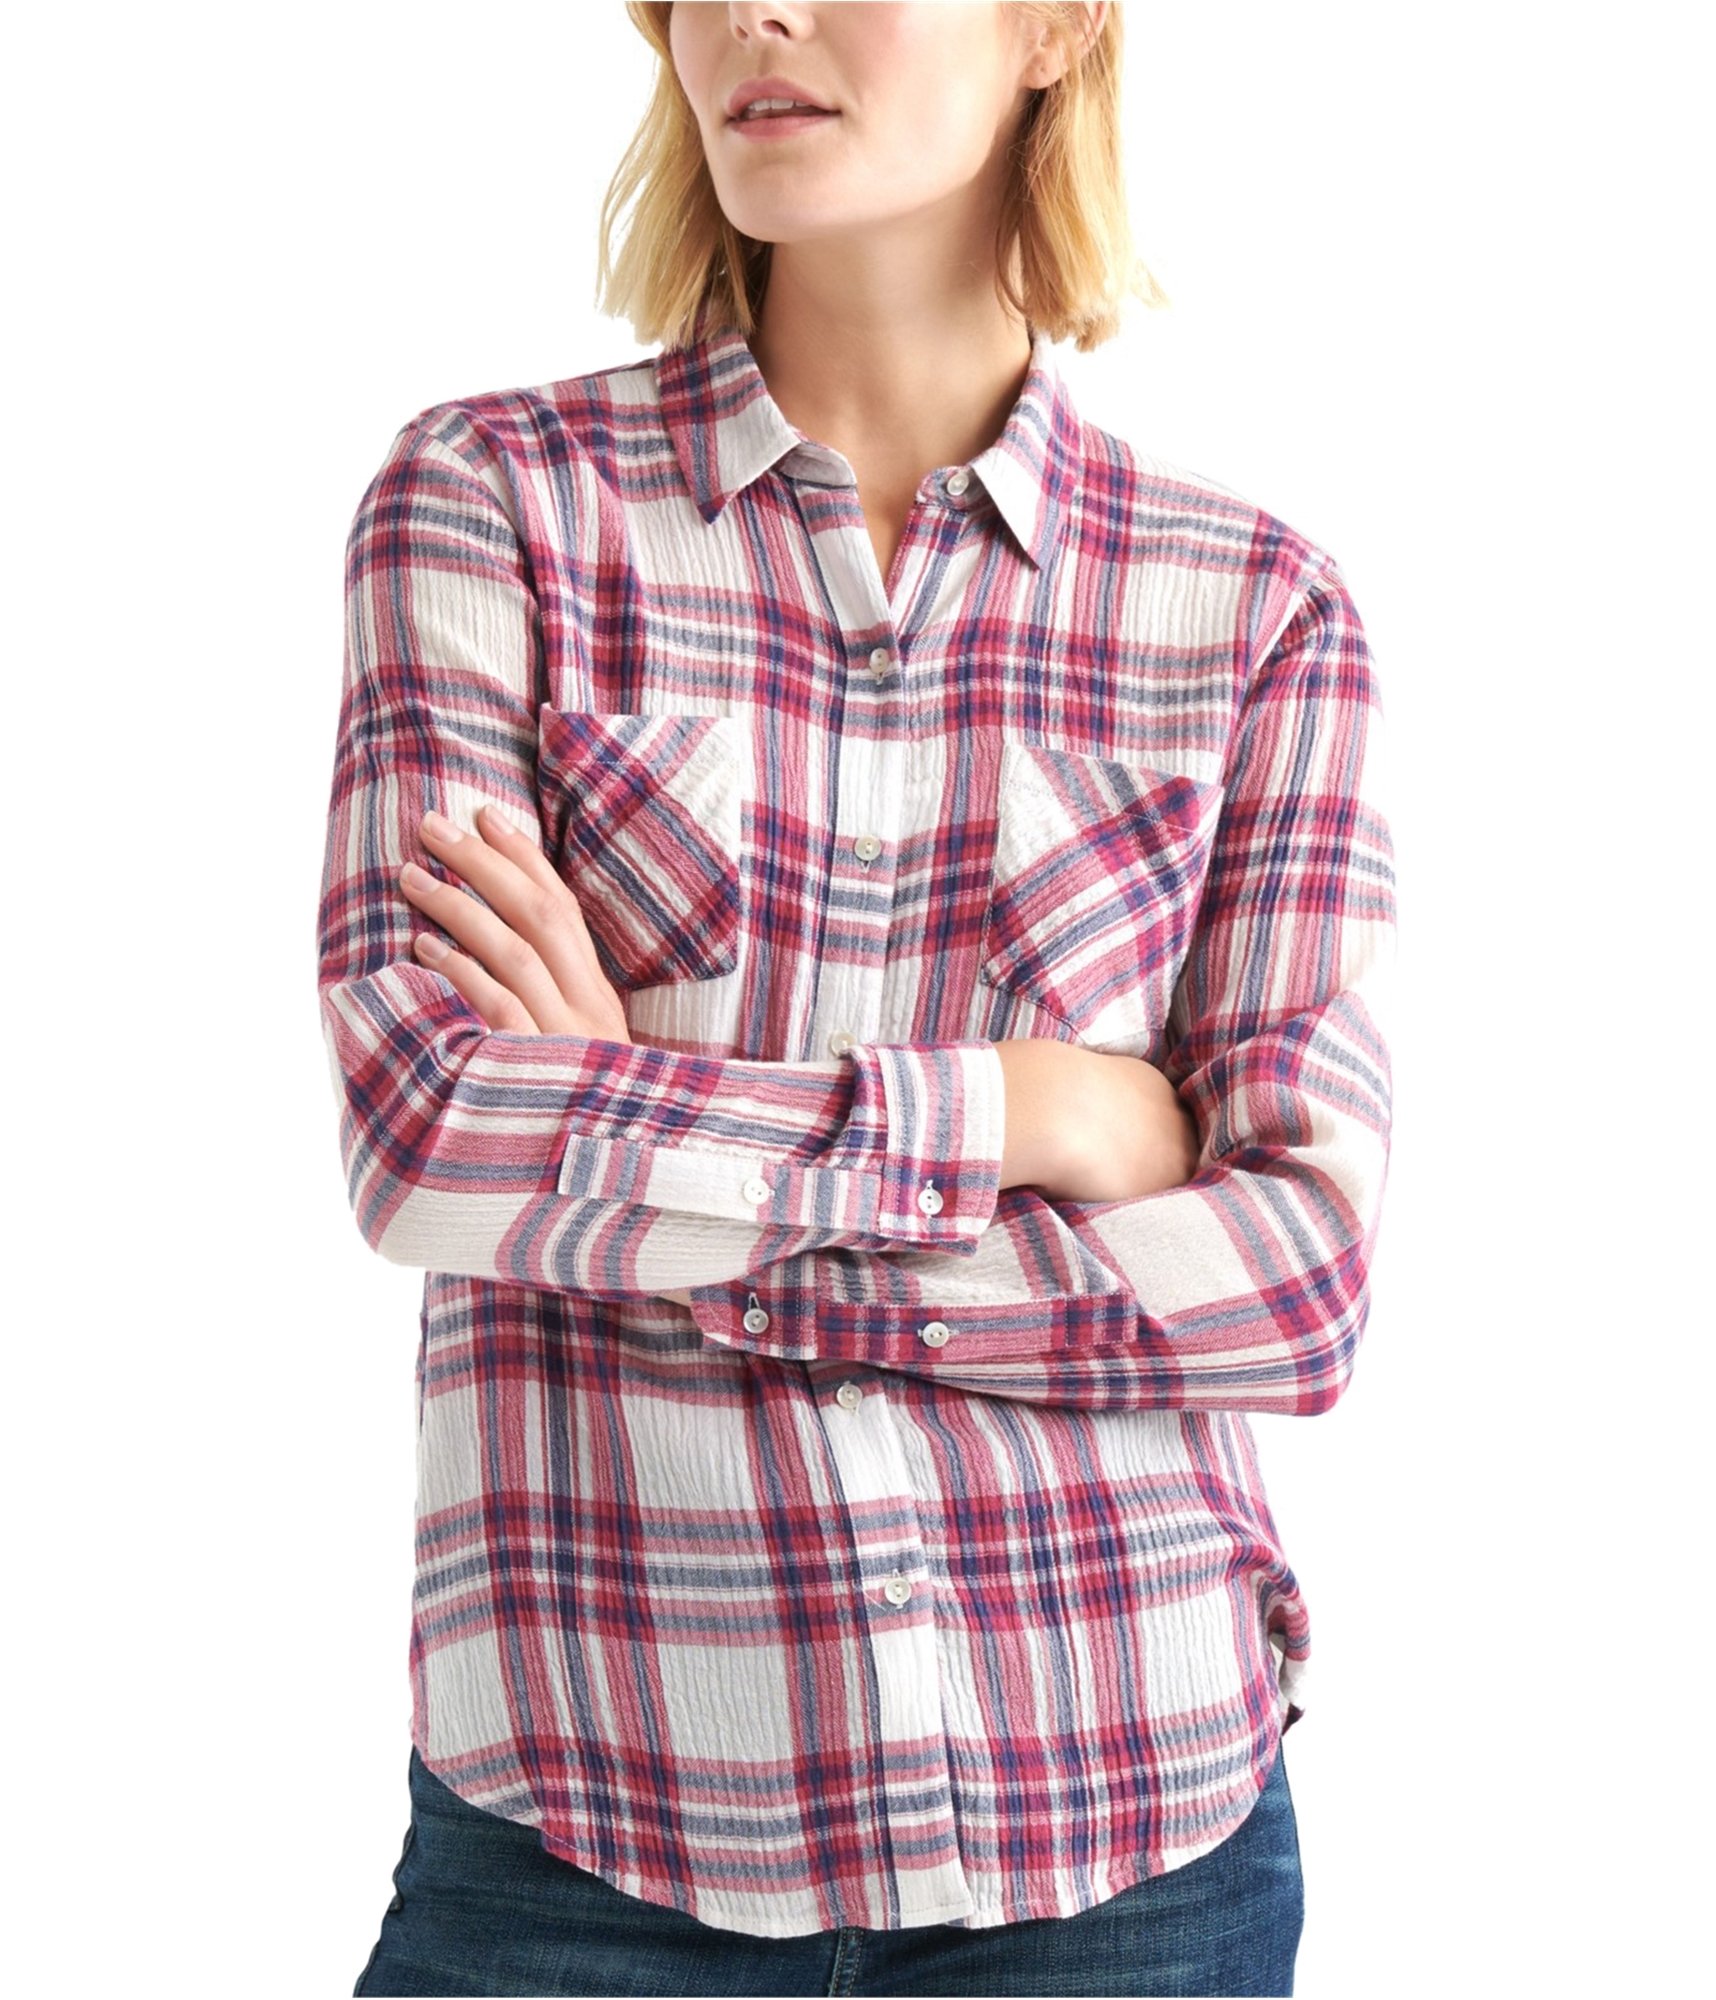 Buy a Lucky Brand Womens Plaid Button Up Shirt, TW1